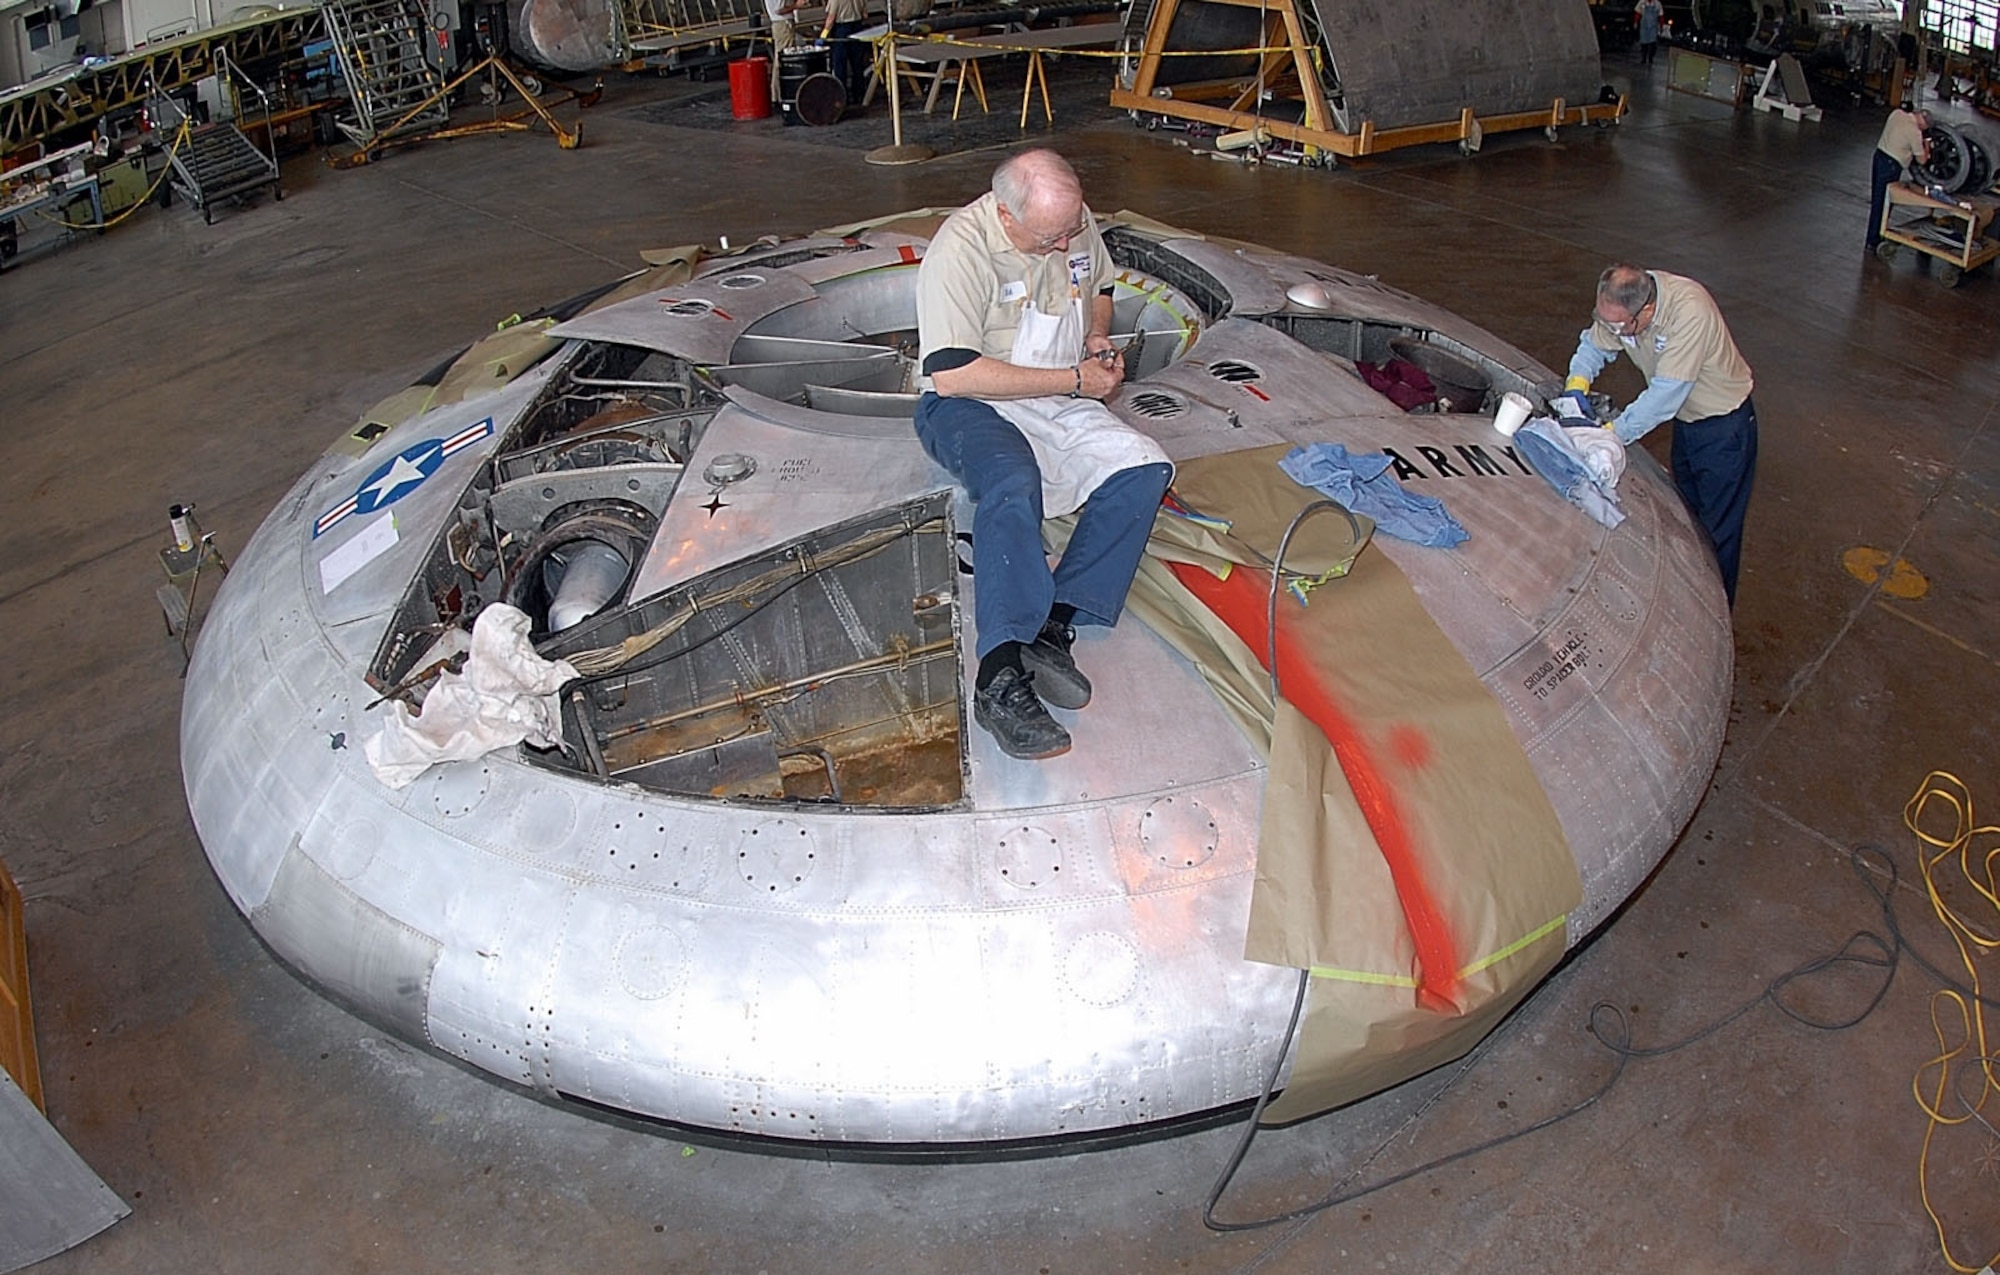 DAYTON, Ohio (12/2007) -- Volunteers Ed Keinle and Lou Thole remove rivets from the Avrocar in the restoration hangar at the National Museum of the United States Air Force. (U.S. Air Force photo)